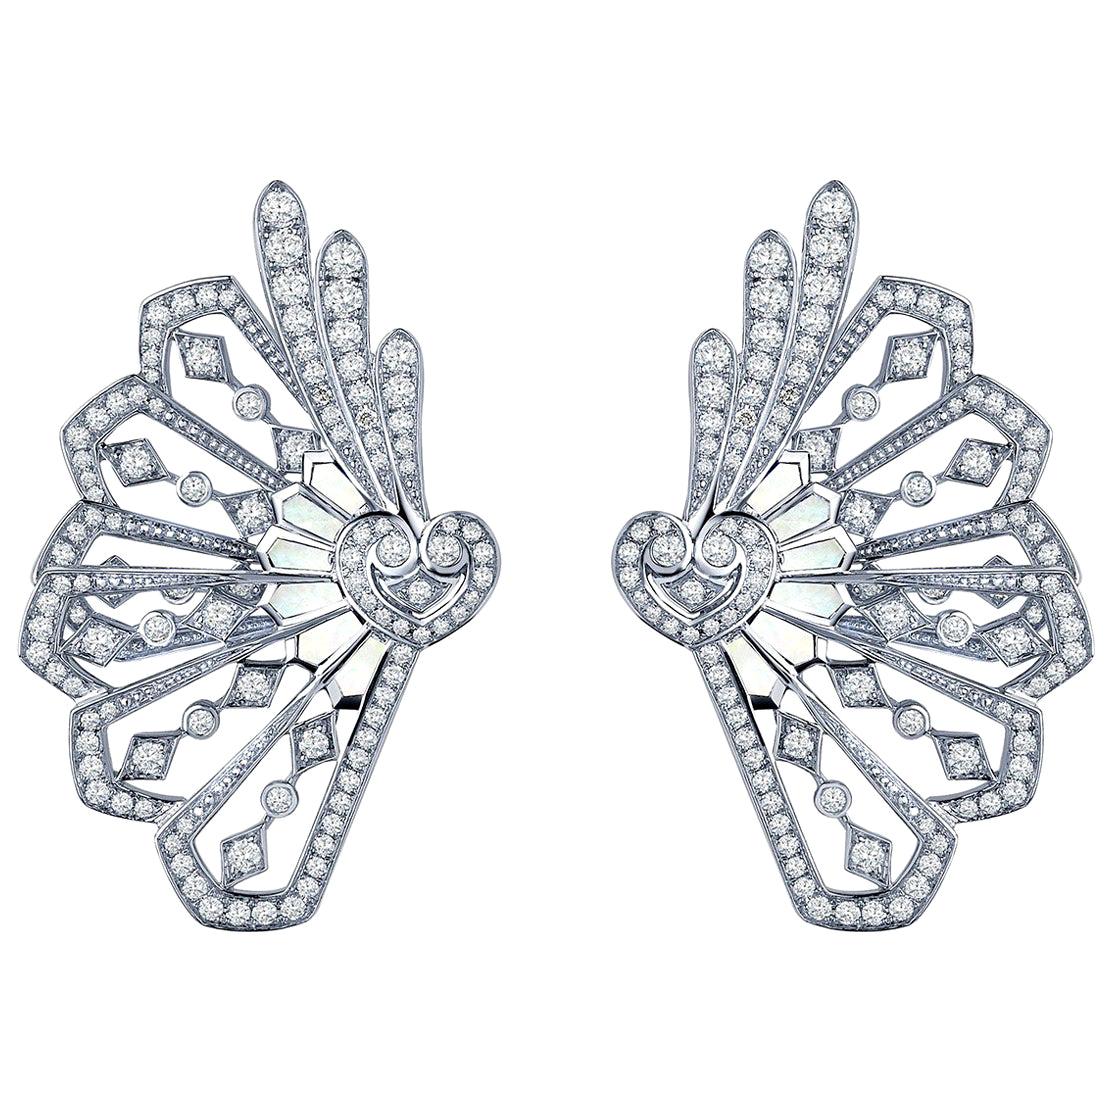 Garrard 'Fanfare' White Gold Climber Earrings Diamond and Mother of Pearl For Sale